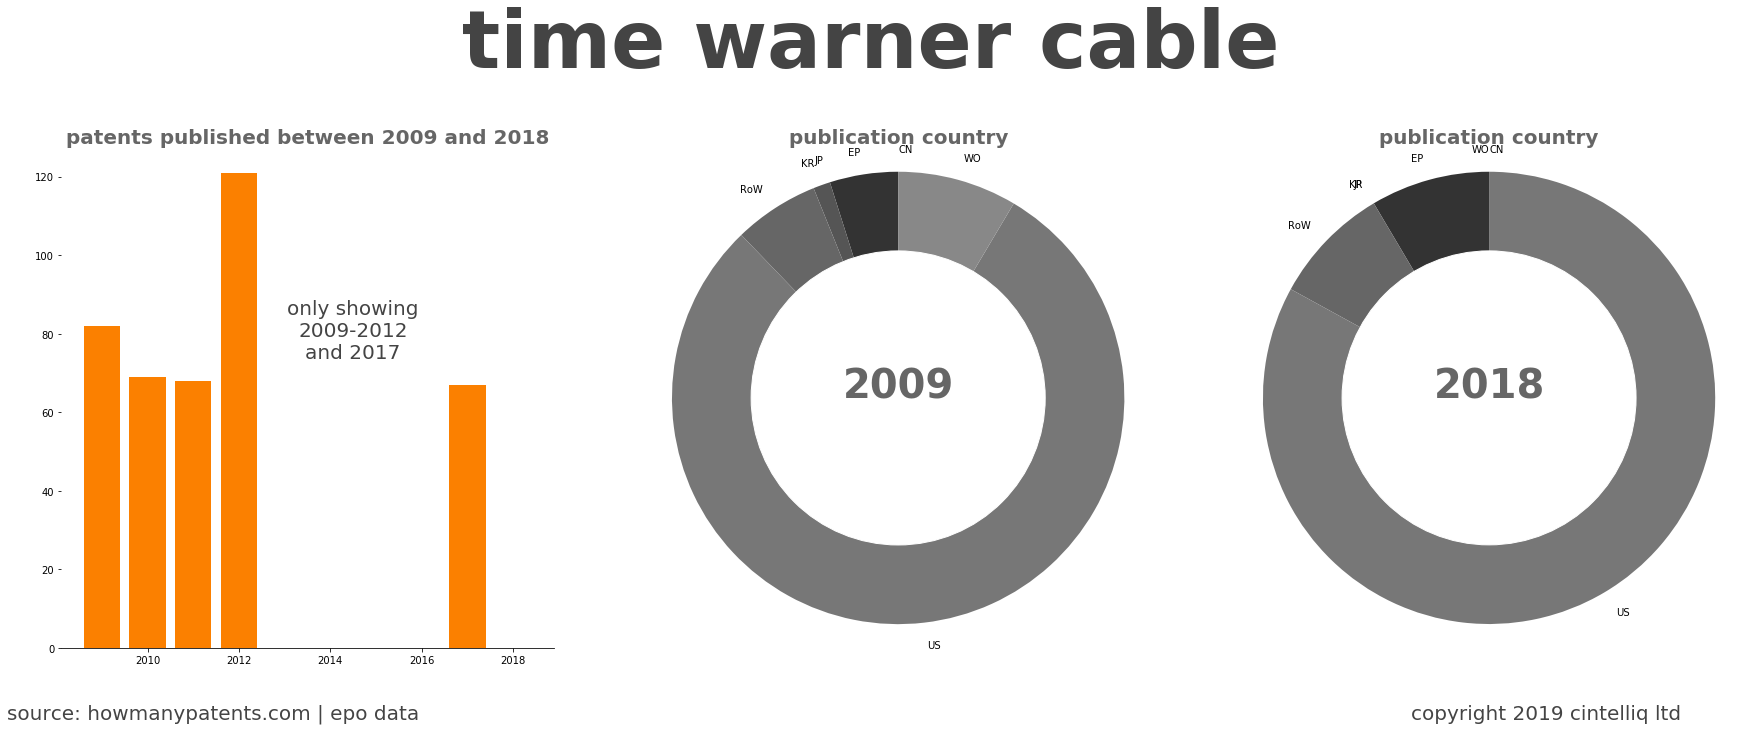 summary of patents for Time Warner Cable